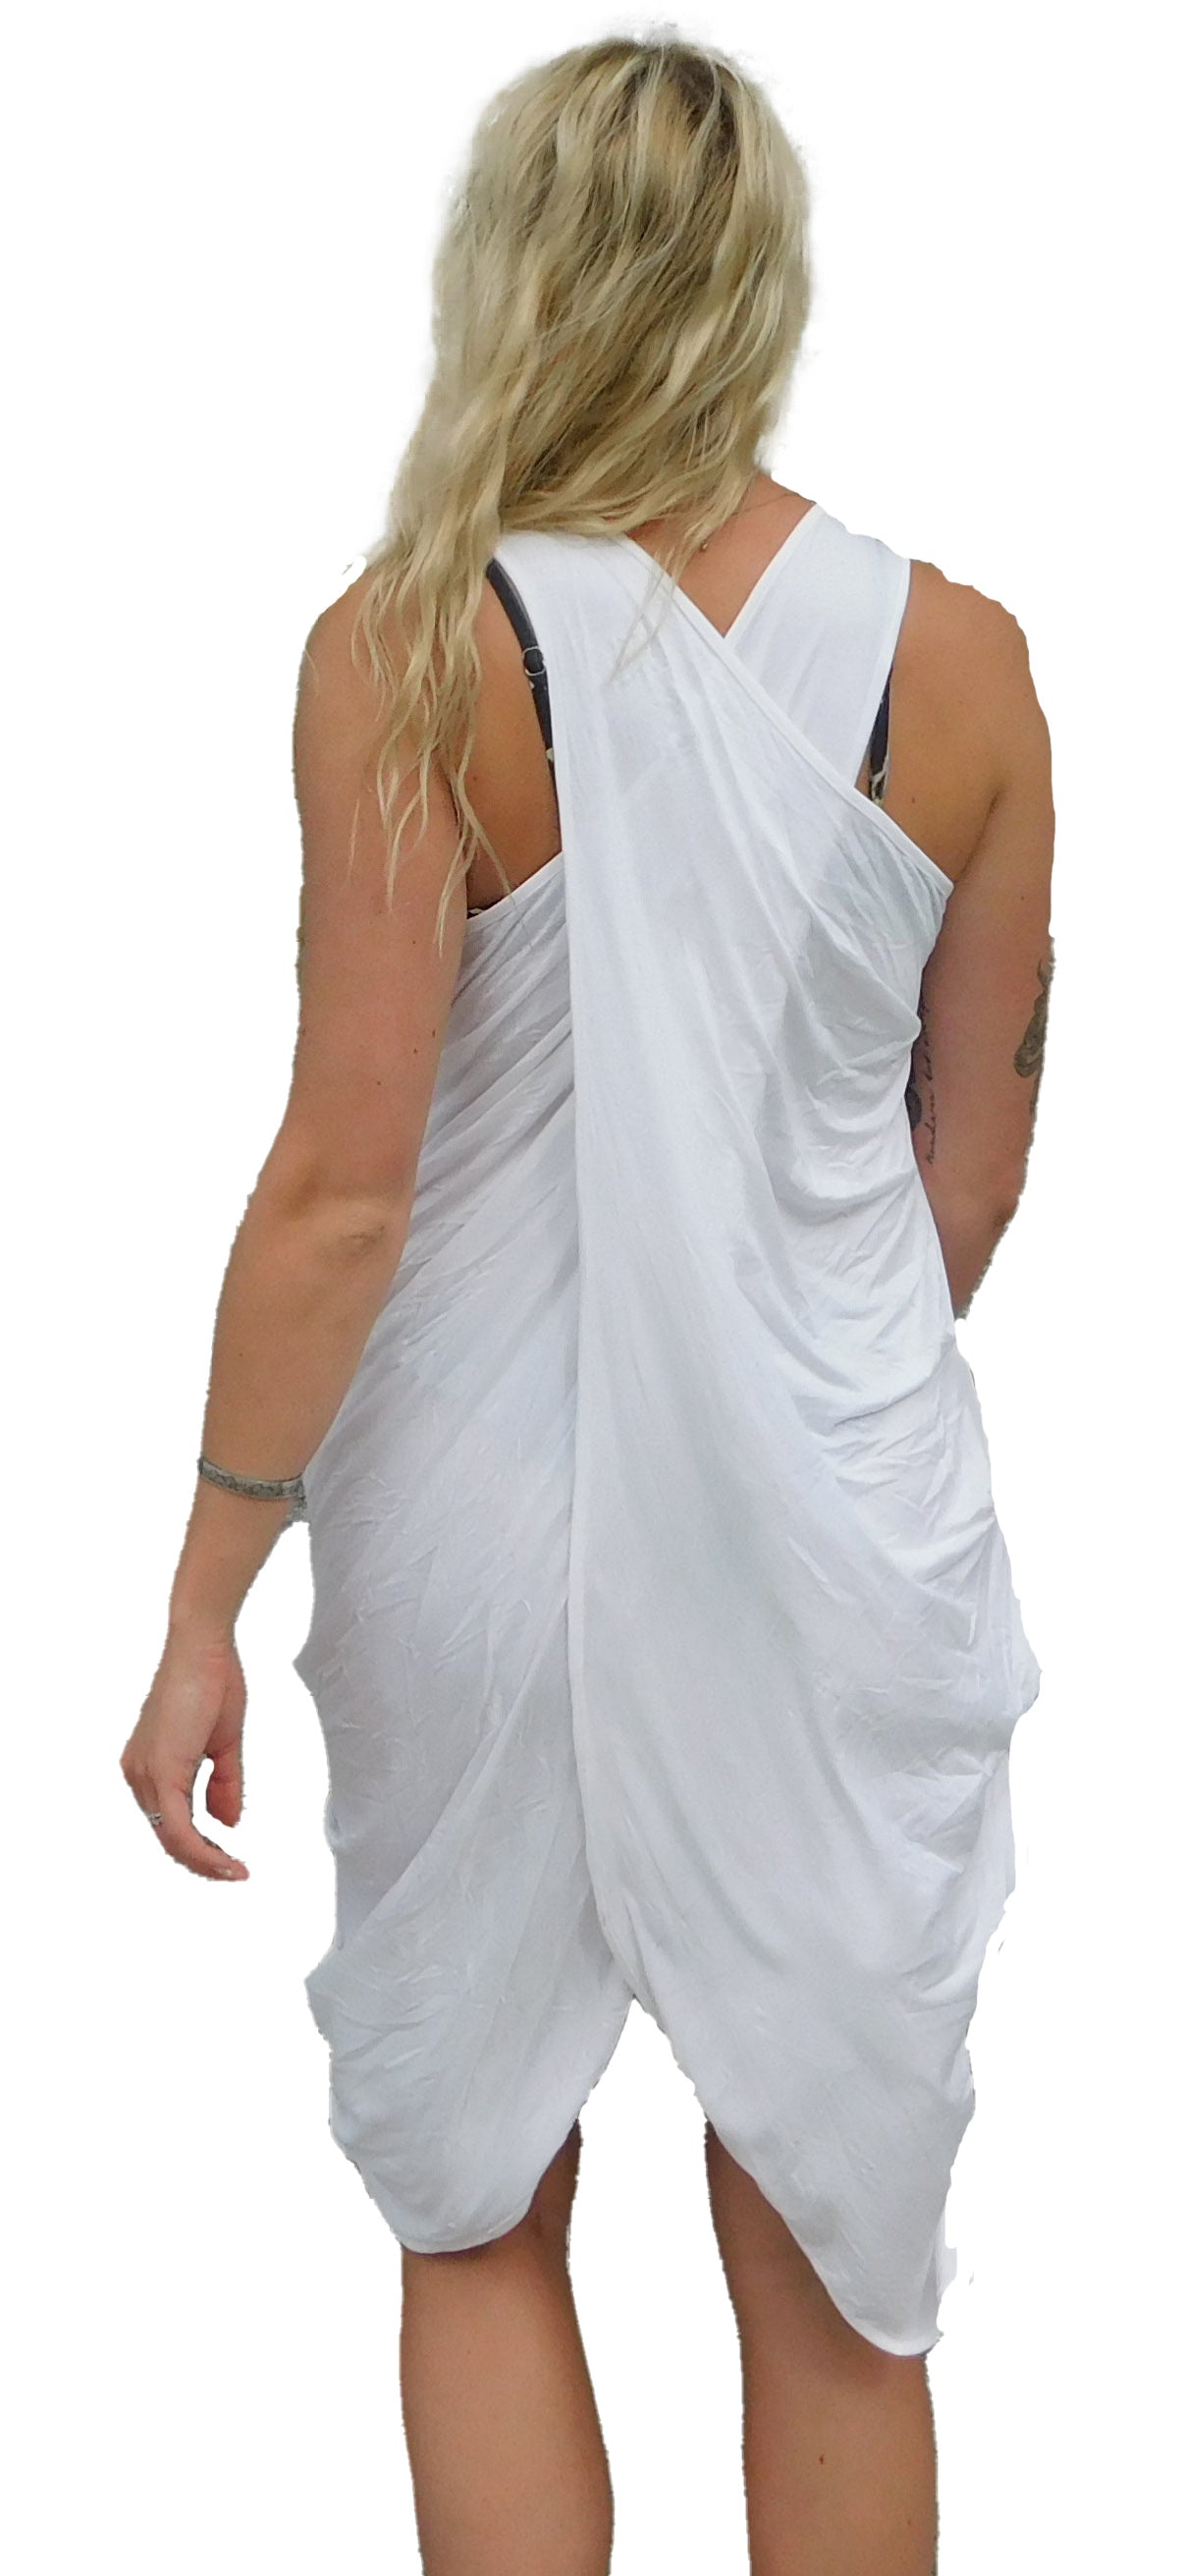 Yogaz New Eco Friendly Bamboo  Ivory Swimsuit Cover-Sun Dress is called "Wave". It's super cute, elegant and so comfortable.